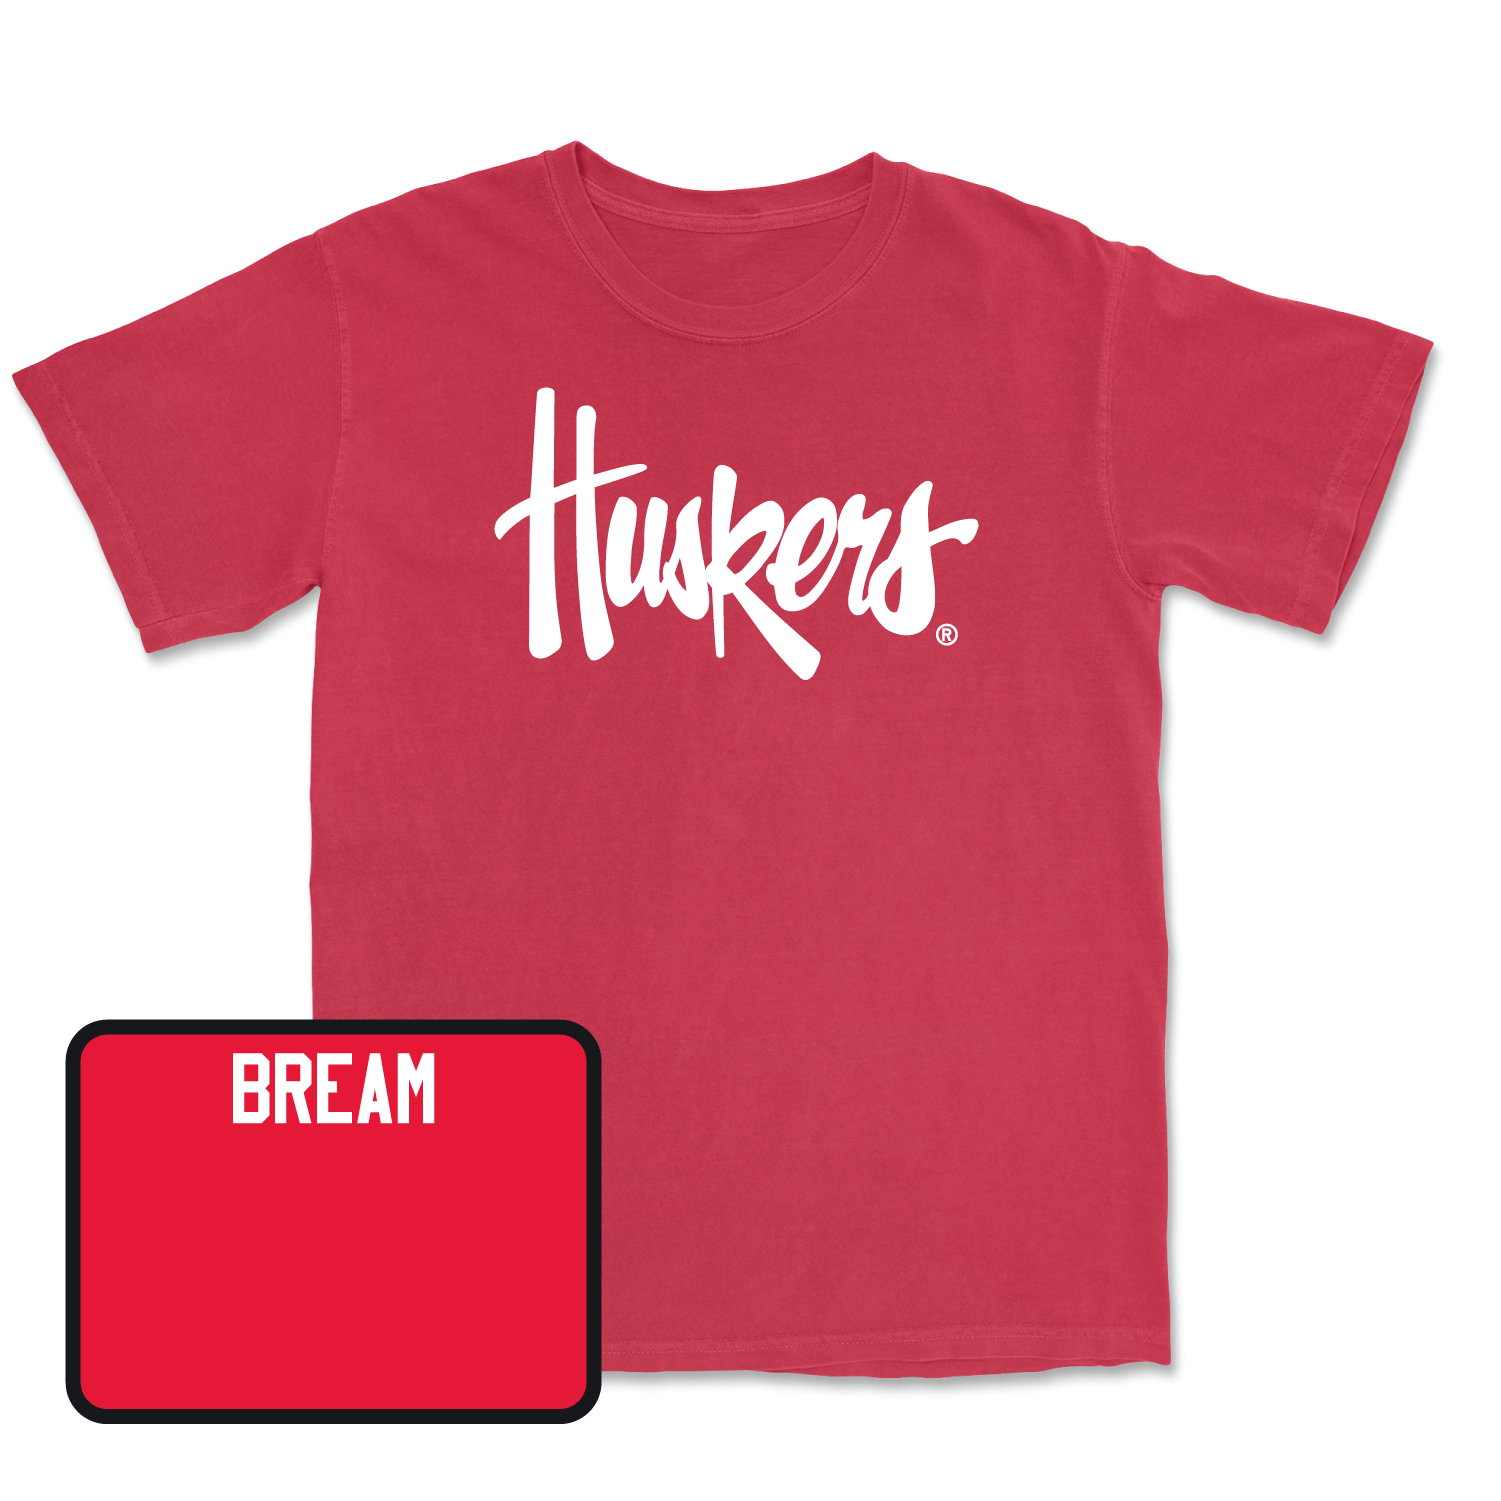 Red Women's Golf Huskers Tee 4X-Large / Brooke Bream